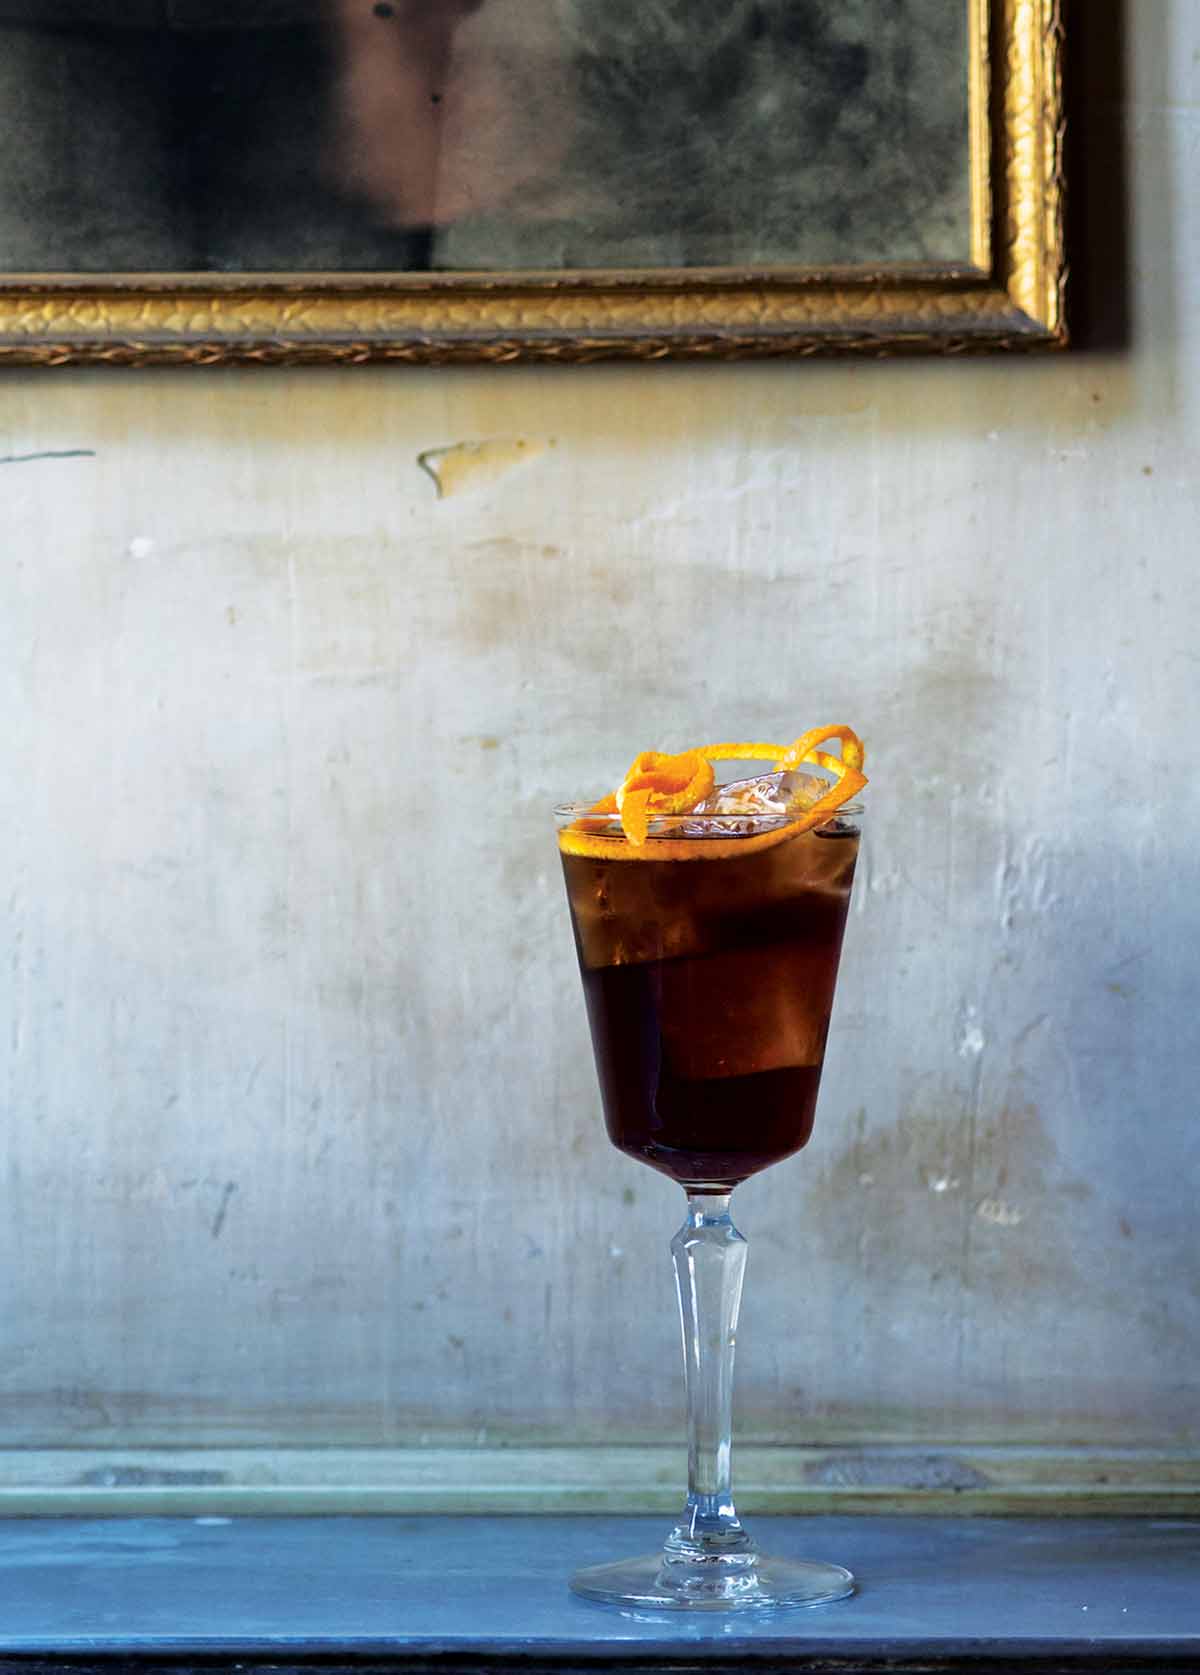 A glass gobelet filled with an Adonis cocktail and an orange twist garnish, in front of a painted background.